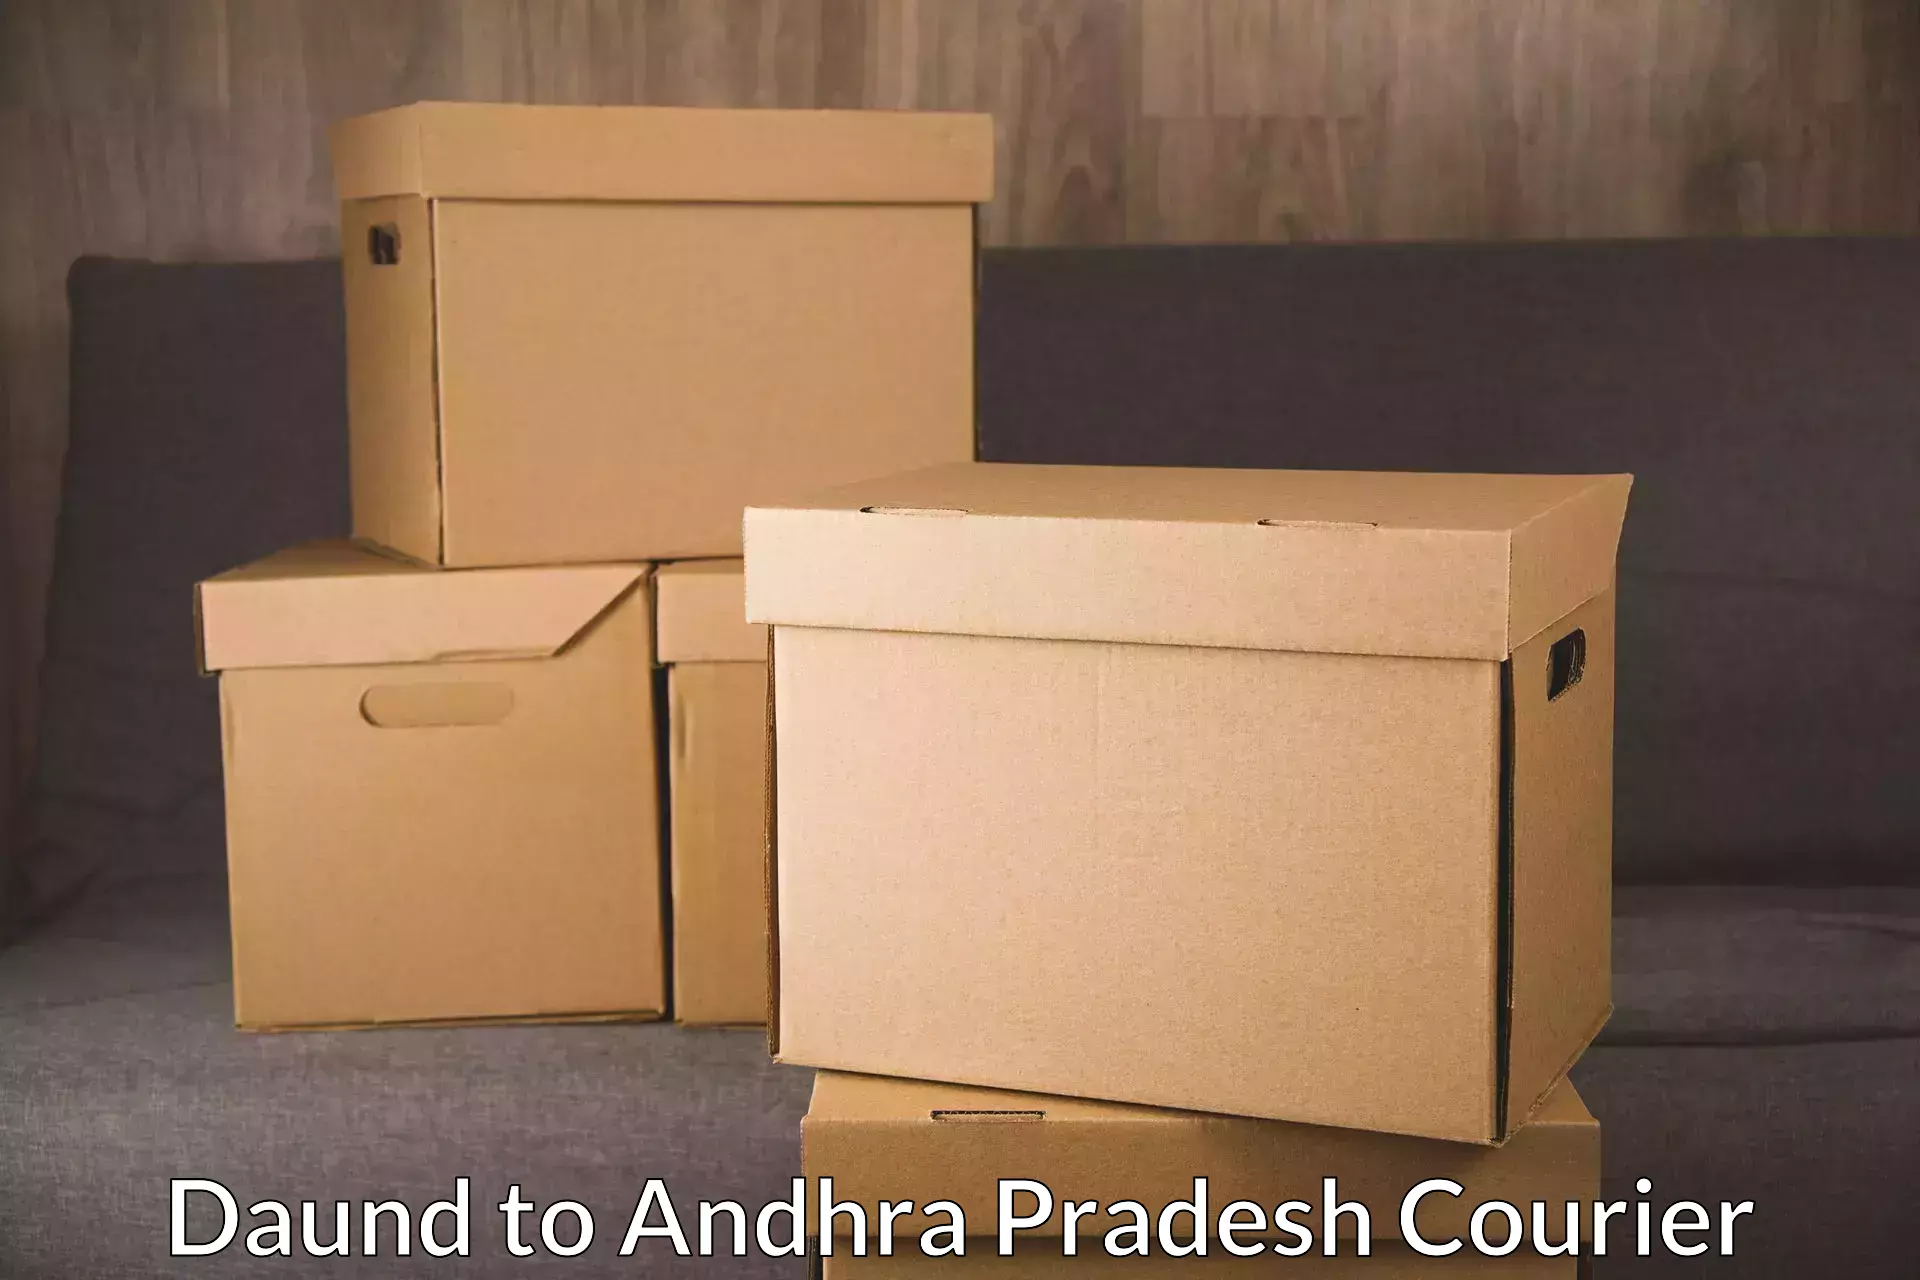 Full-service courier options Daund to Visakhapatnam Port